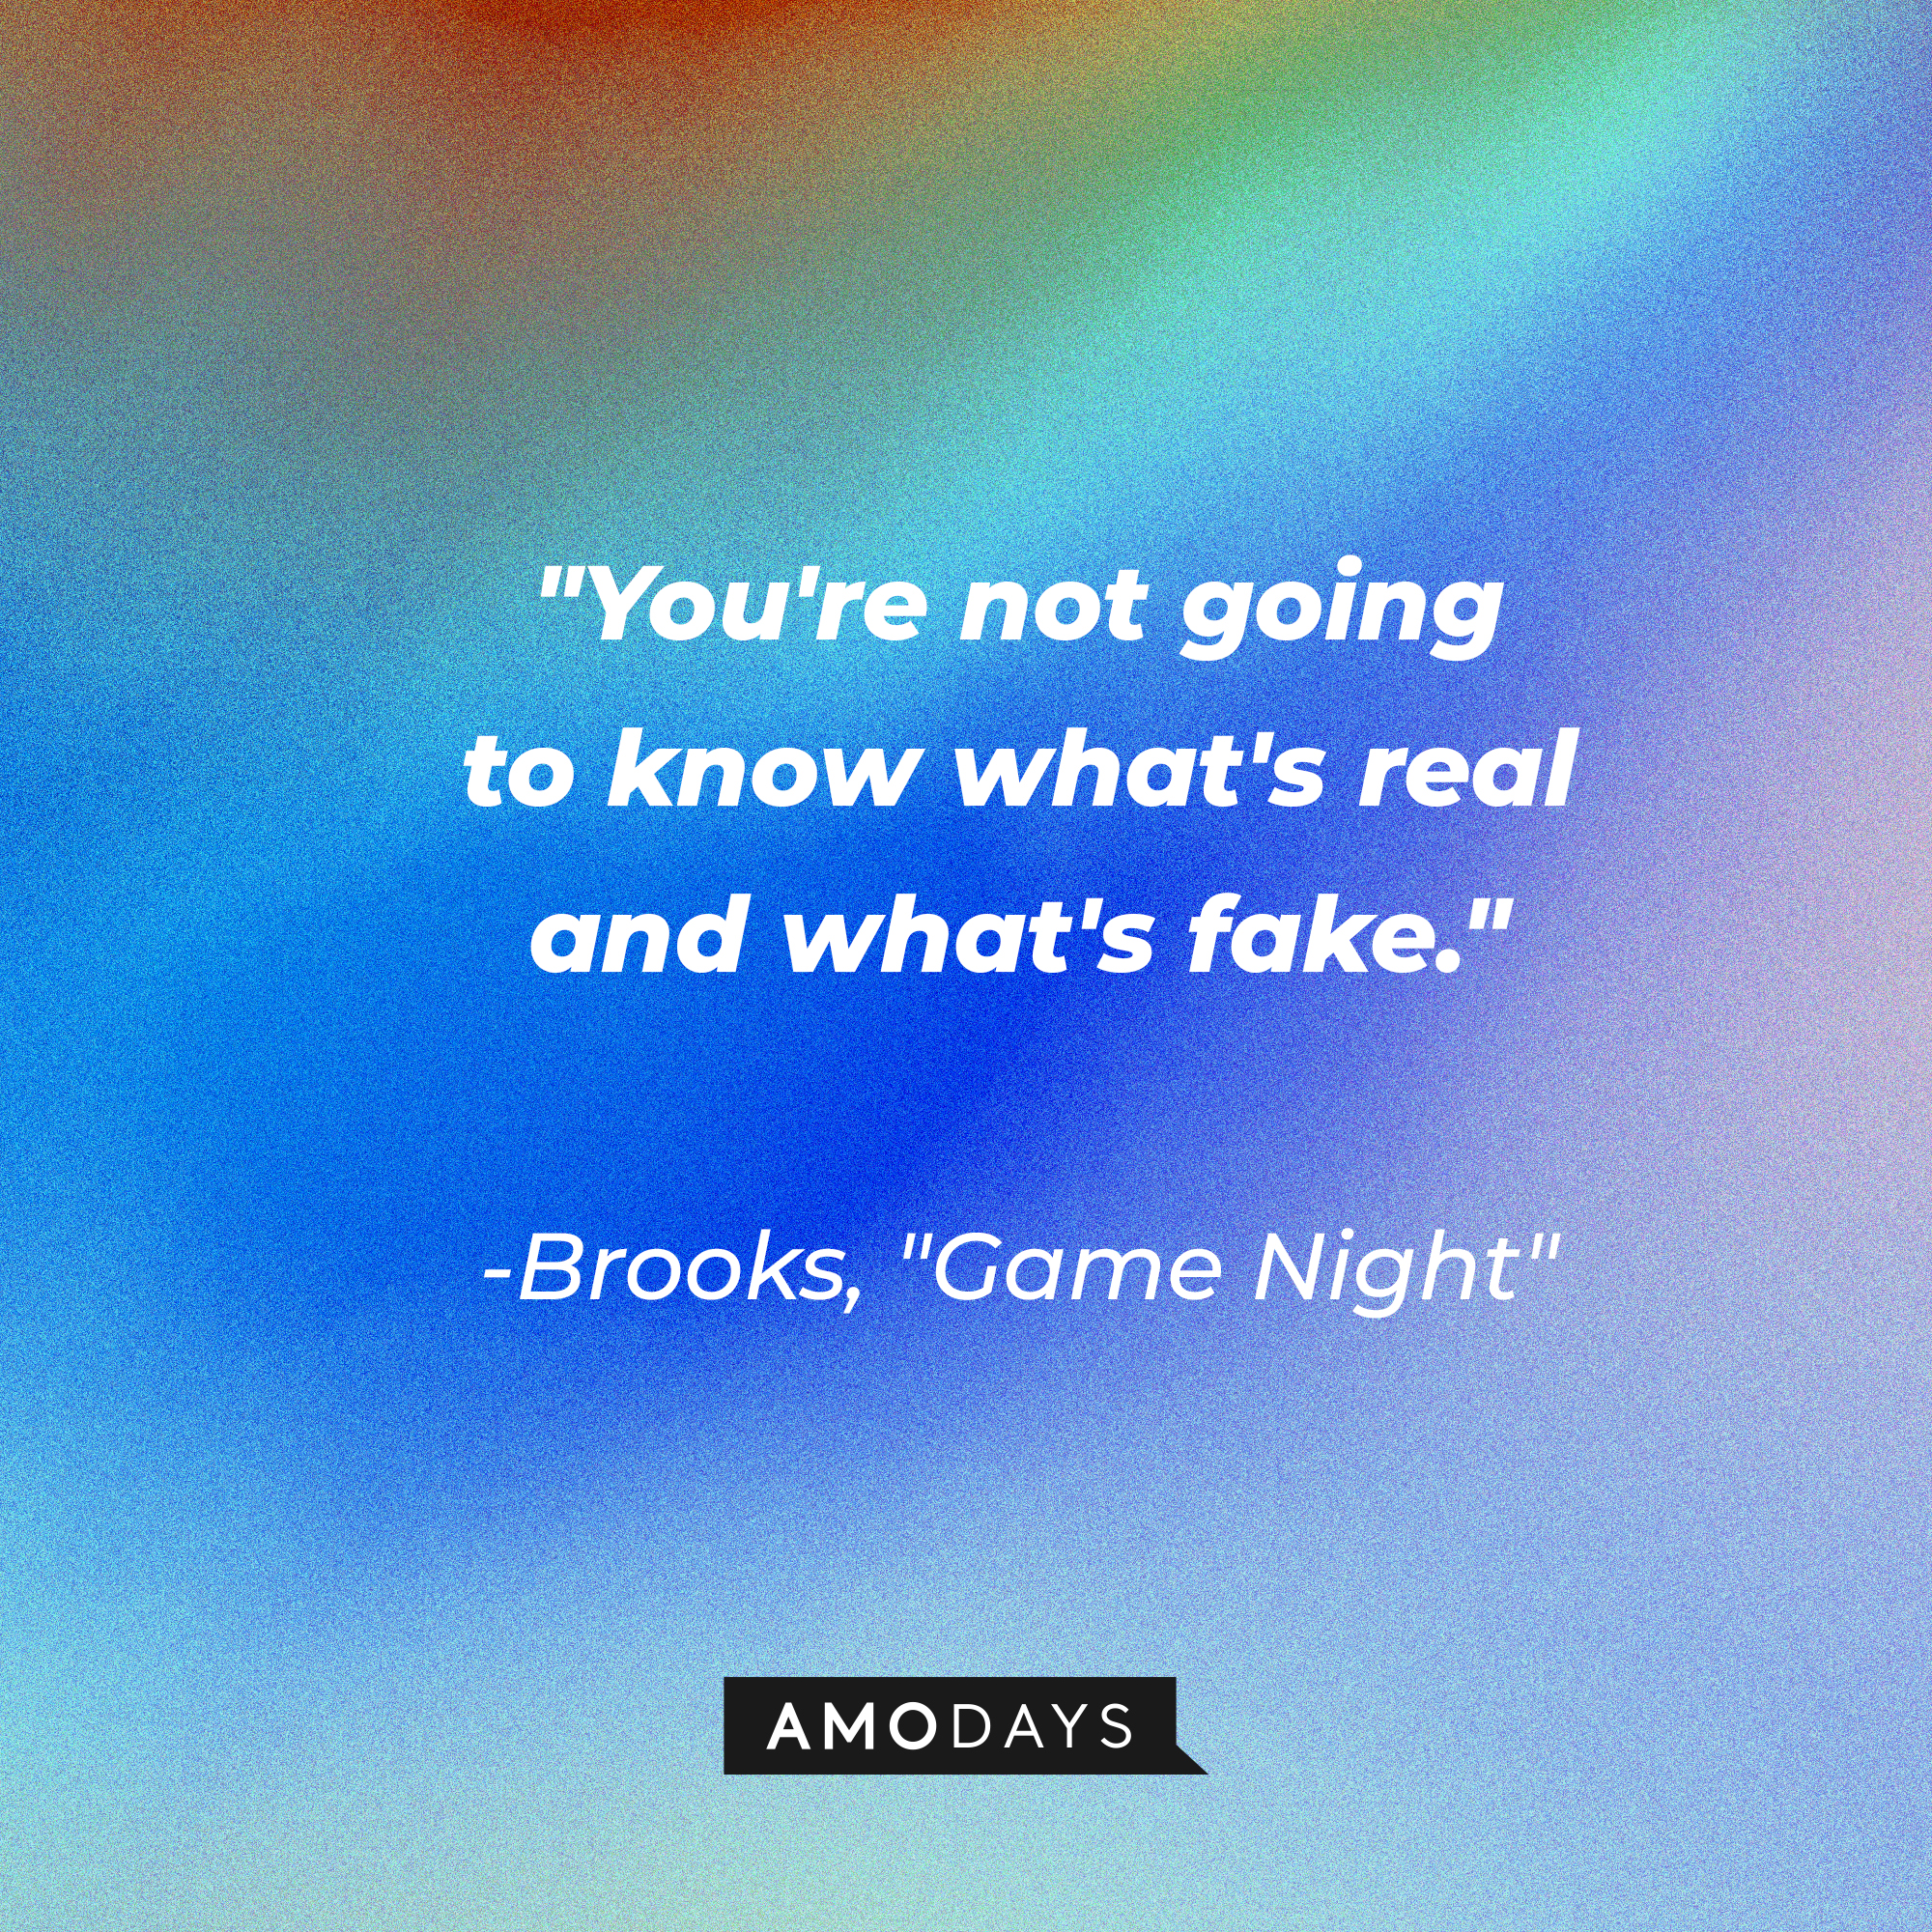 Brooks's Quote from “Game Night”: “You're not going to know what's real and what's fake.” | Source: AmoDays